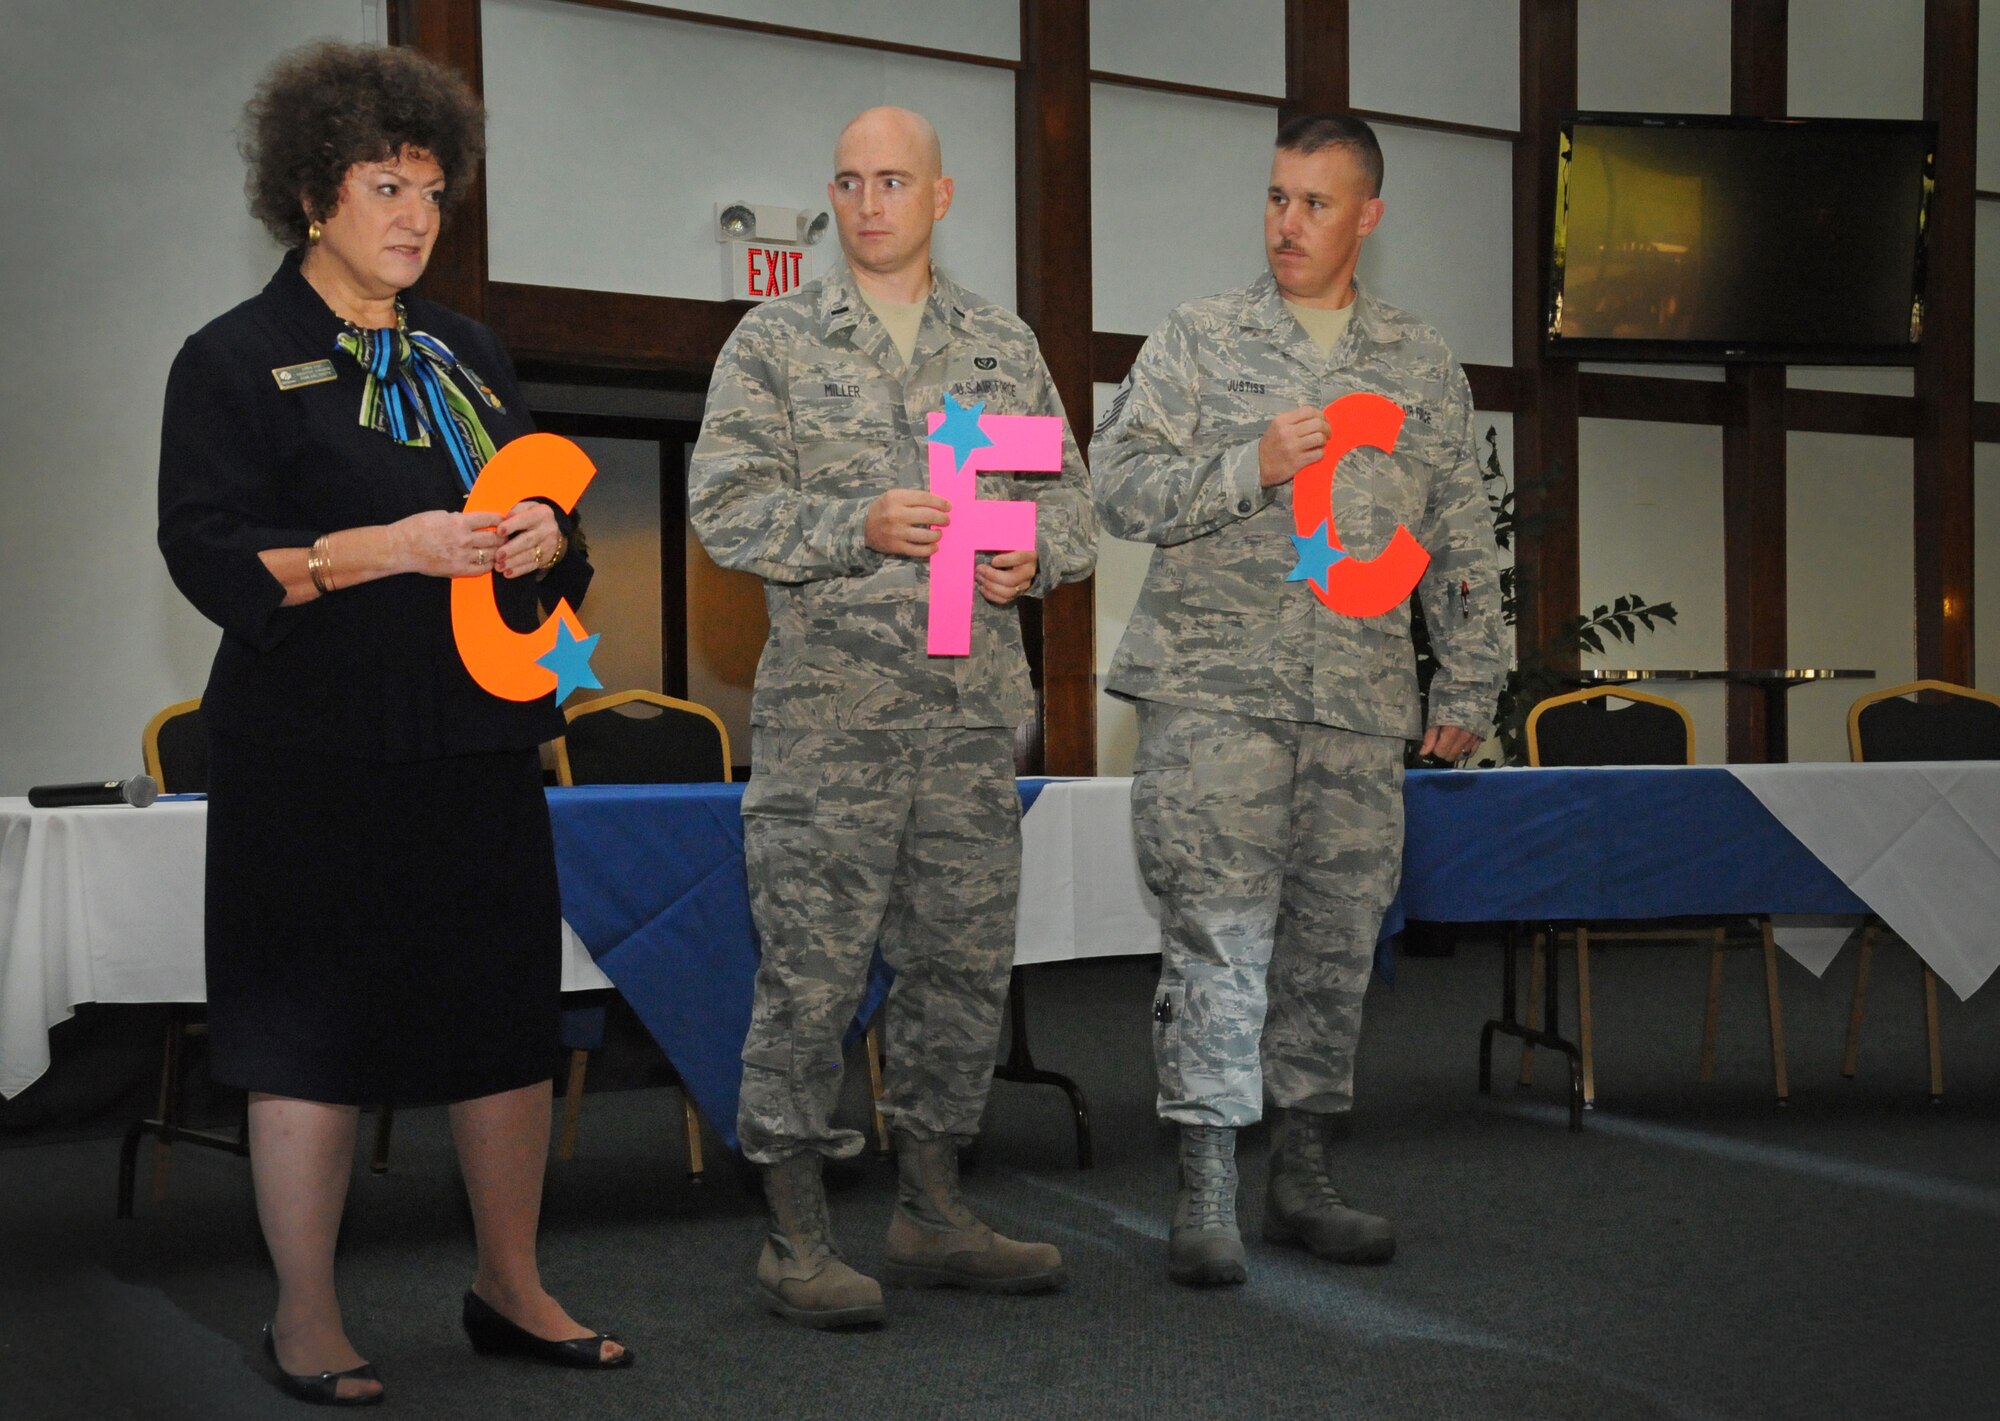 Vickie Fish, Guam Girl Scouts executive director, 1st Lt. Jeremy Miller 554th RED HORSE squadron project engineer, and Master Sgt. David Justiss, 554th RED HORSE Squadron first sergeant, hold up letters during a Combined Federal Campaign presentation Sept. 26, 2013 on Andersen Air Force Base, Guam. The presentation educated Airmen about the CFC program and informed them of volunteer opportunities and local charities they can contribute to. This year’s CFC program runs through Oct. 31. Anyone who would like to donate should contact one of their unit’s key workers. (U.S. Air Force photo by Airman 1st Class Amanda Morris/Released)